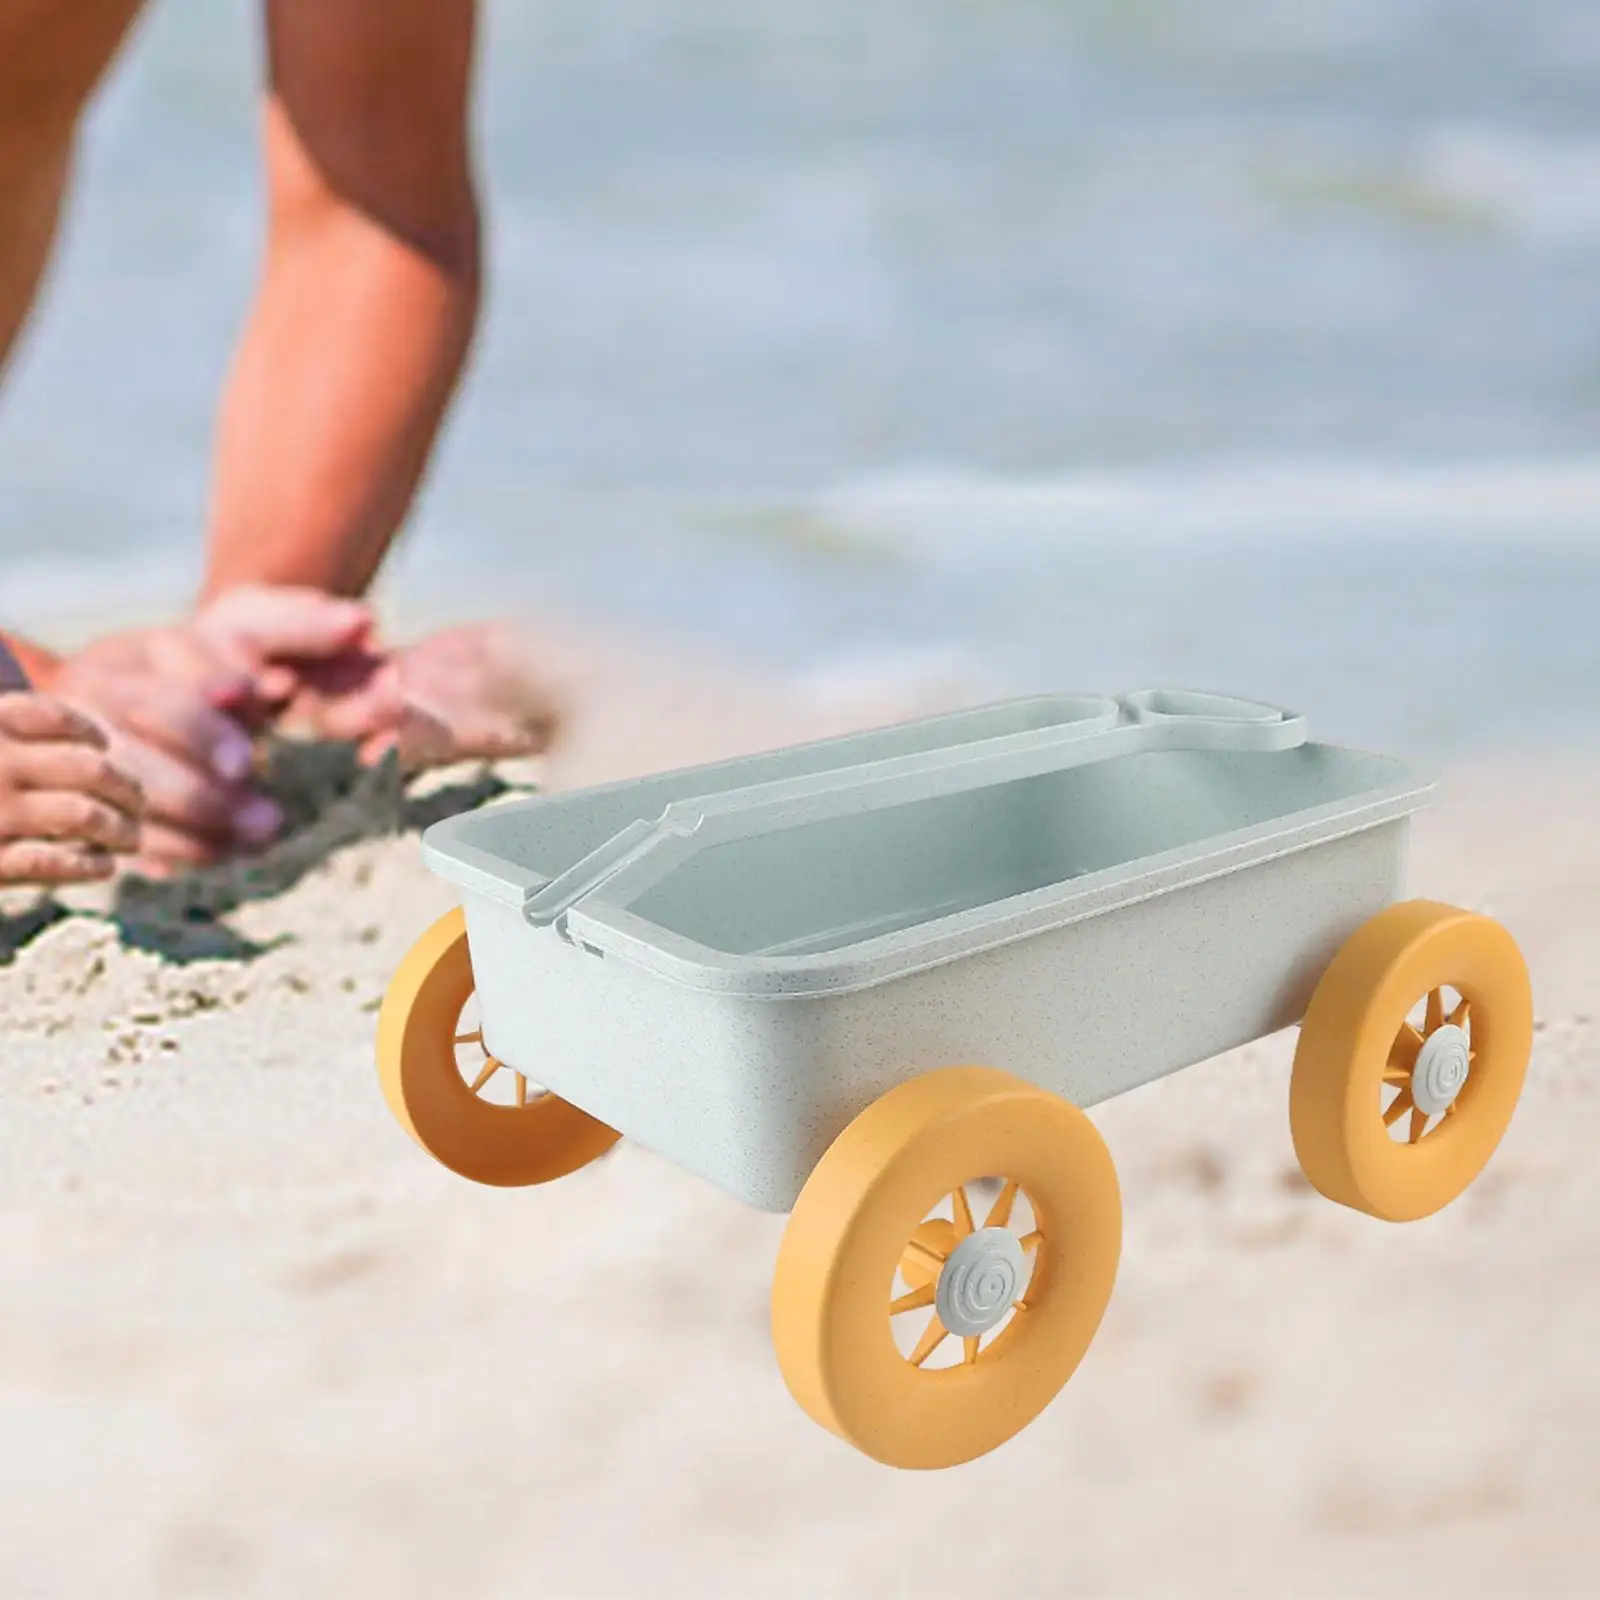 Kids Small Wagon Toys Outdoor Sand Toys Vehicle for Holding Small Toys